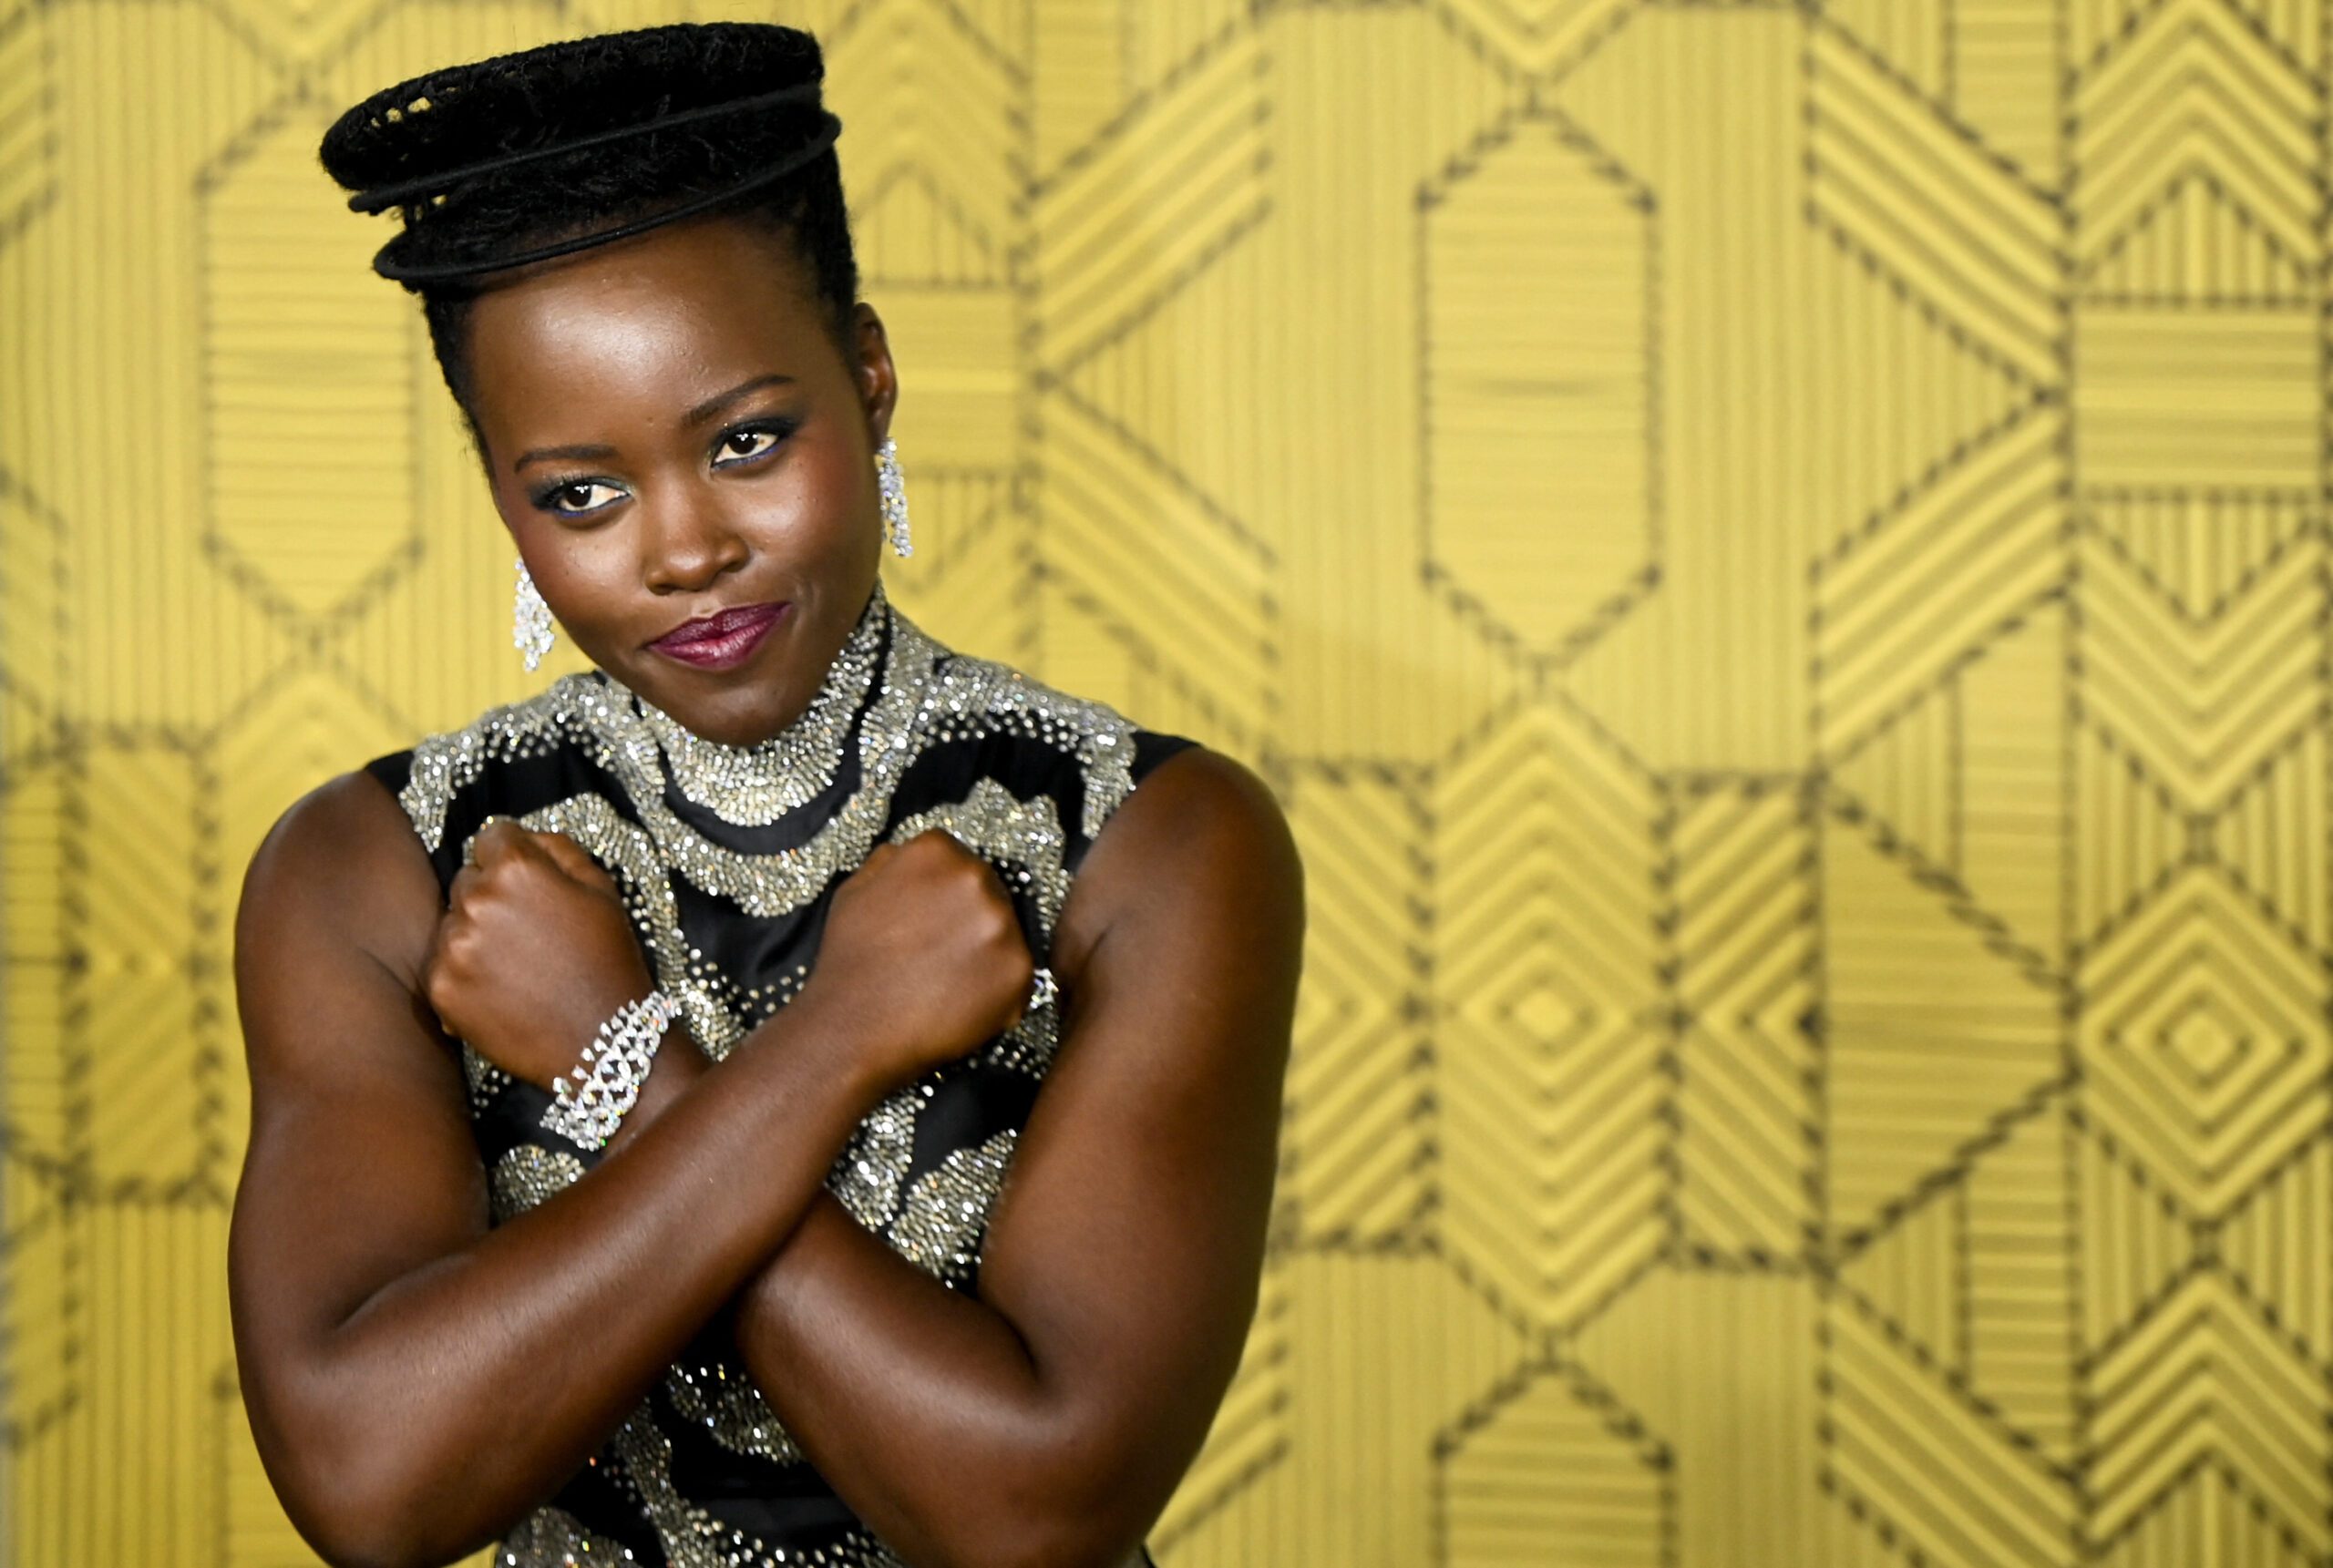 ‘Black Panther’ stars say film changed perceptions of Africa